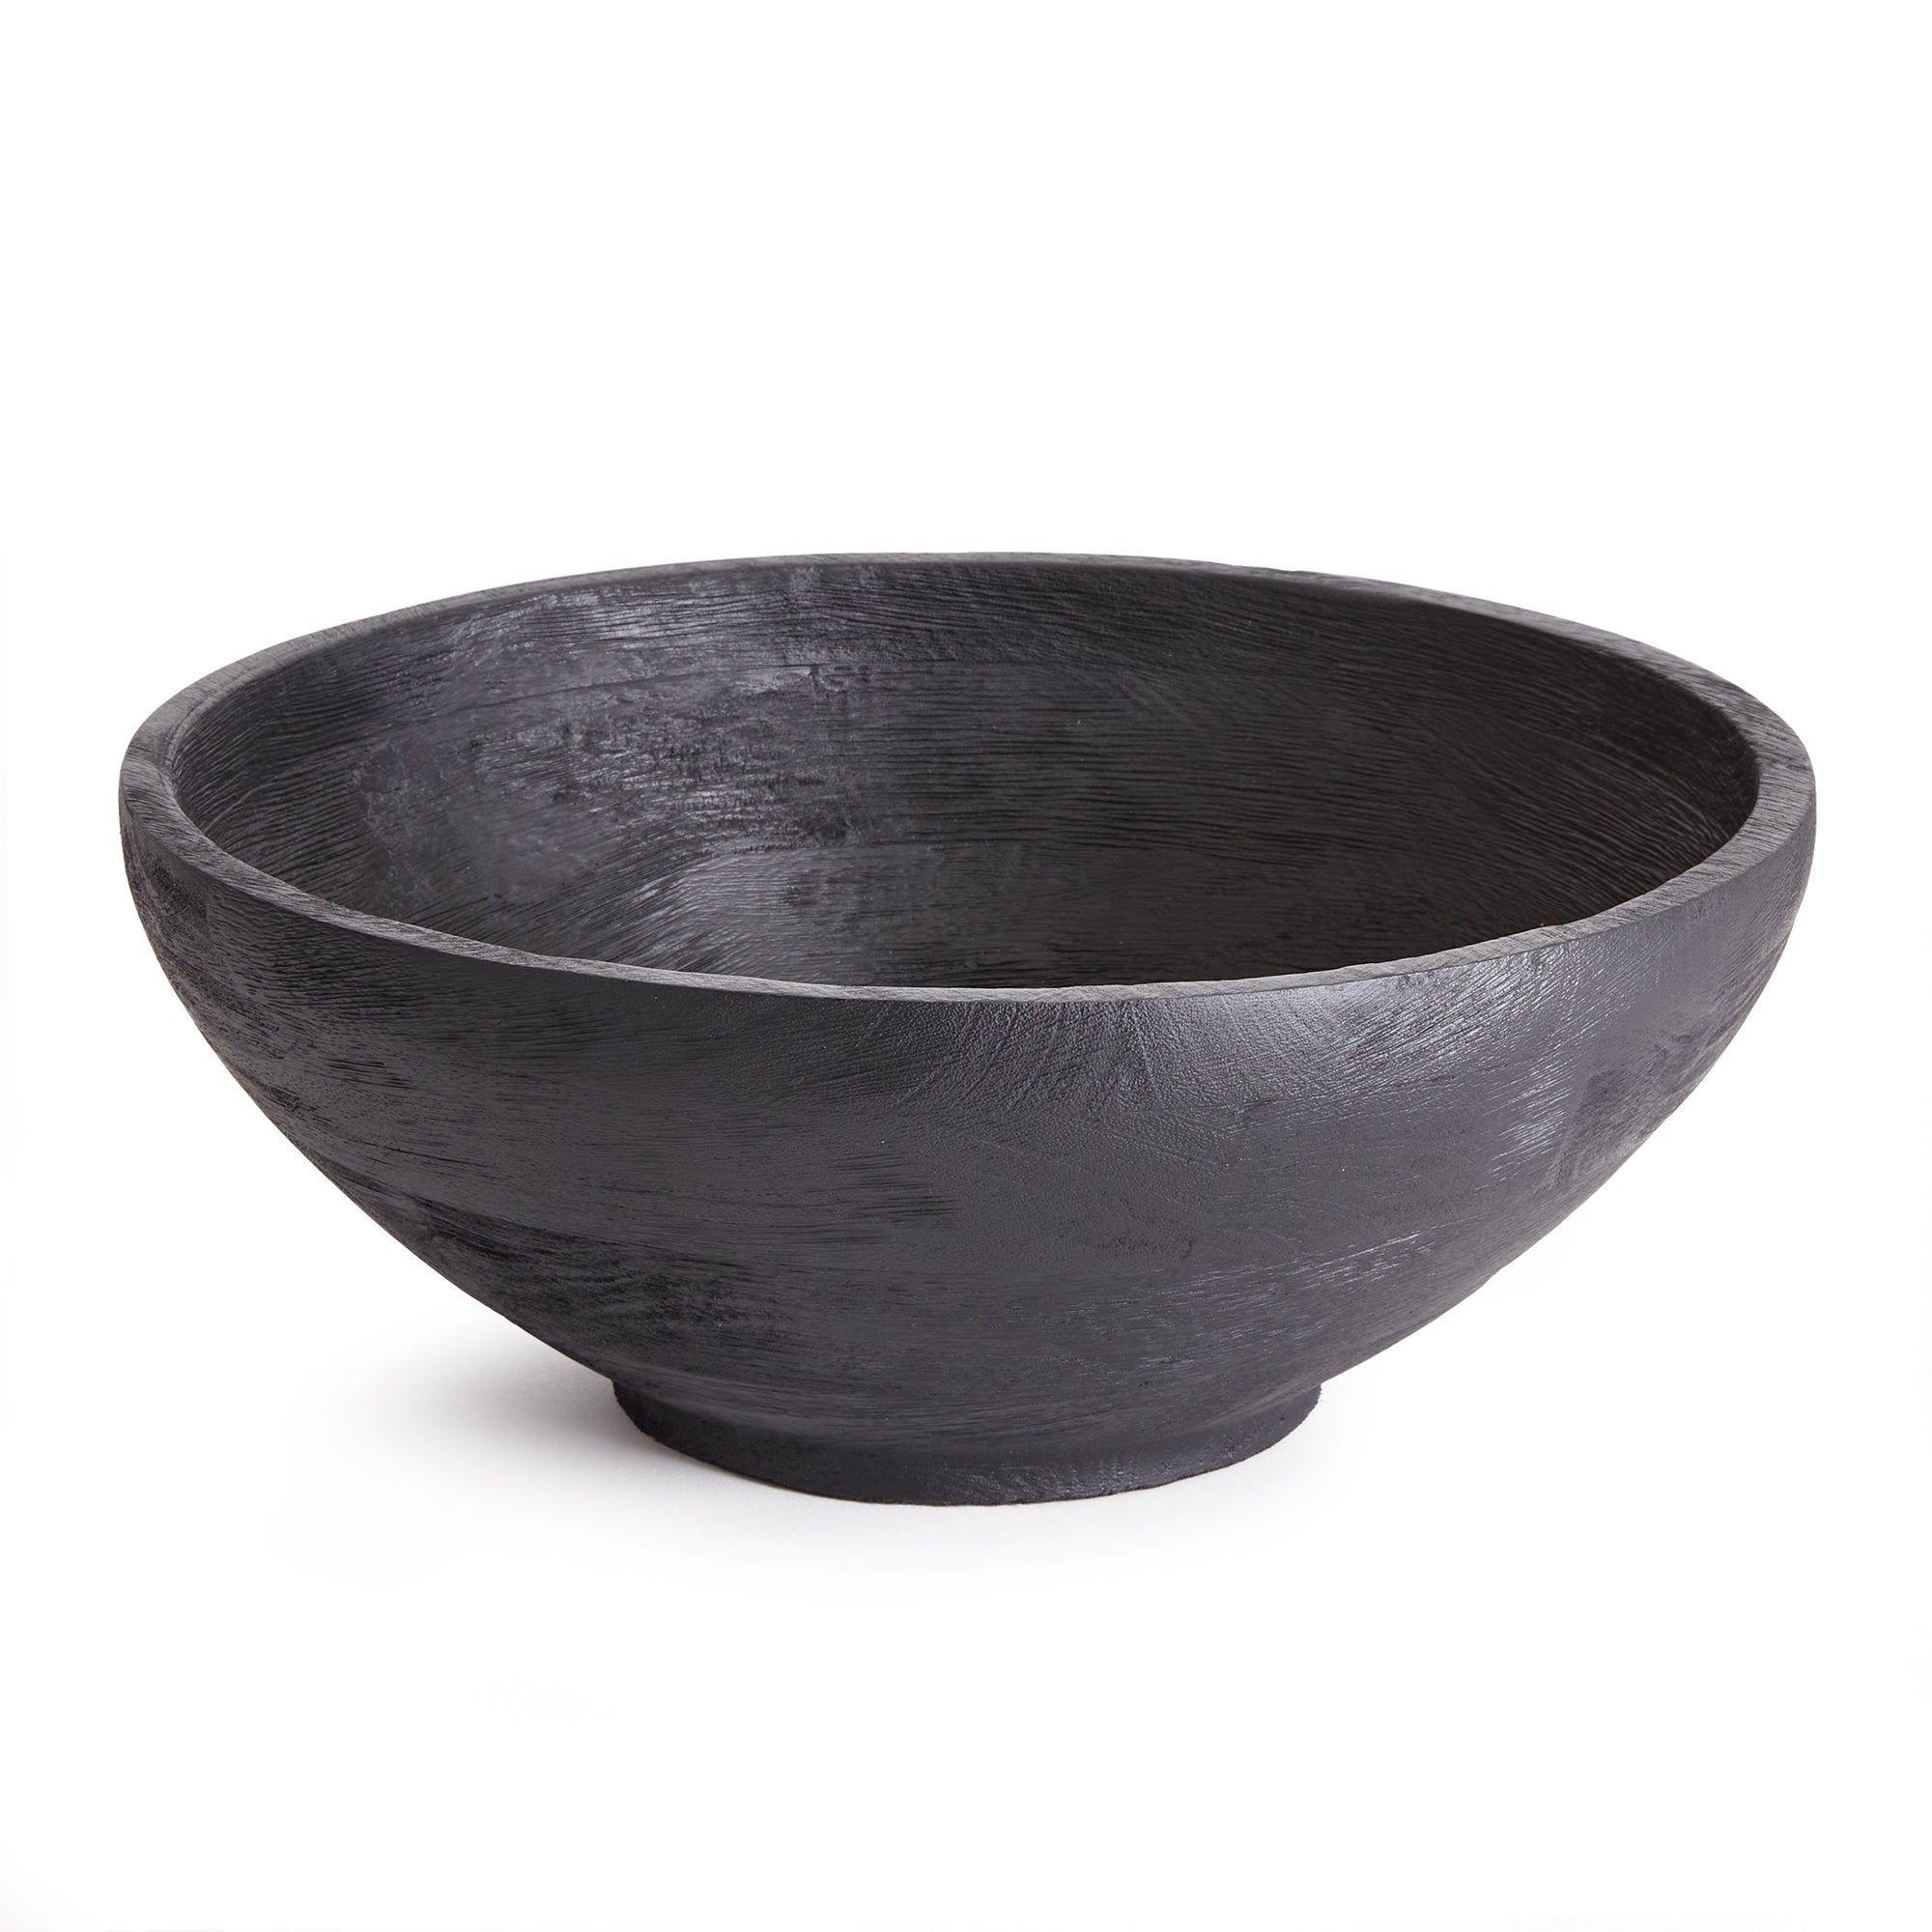 Serve up your best salad in this handcrafted serving bowl. Made of a solid mango wood and stained a dramatic deep black, it is a stunning vessel for your favorite recipes. Amethyst Home provides interior design, new construction, custom furniture, and area rugs in the Park City metro area.